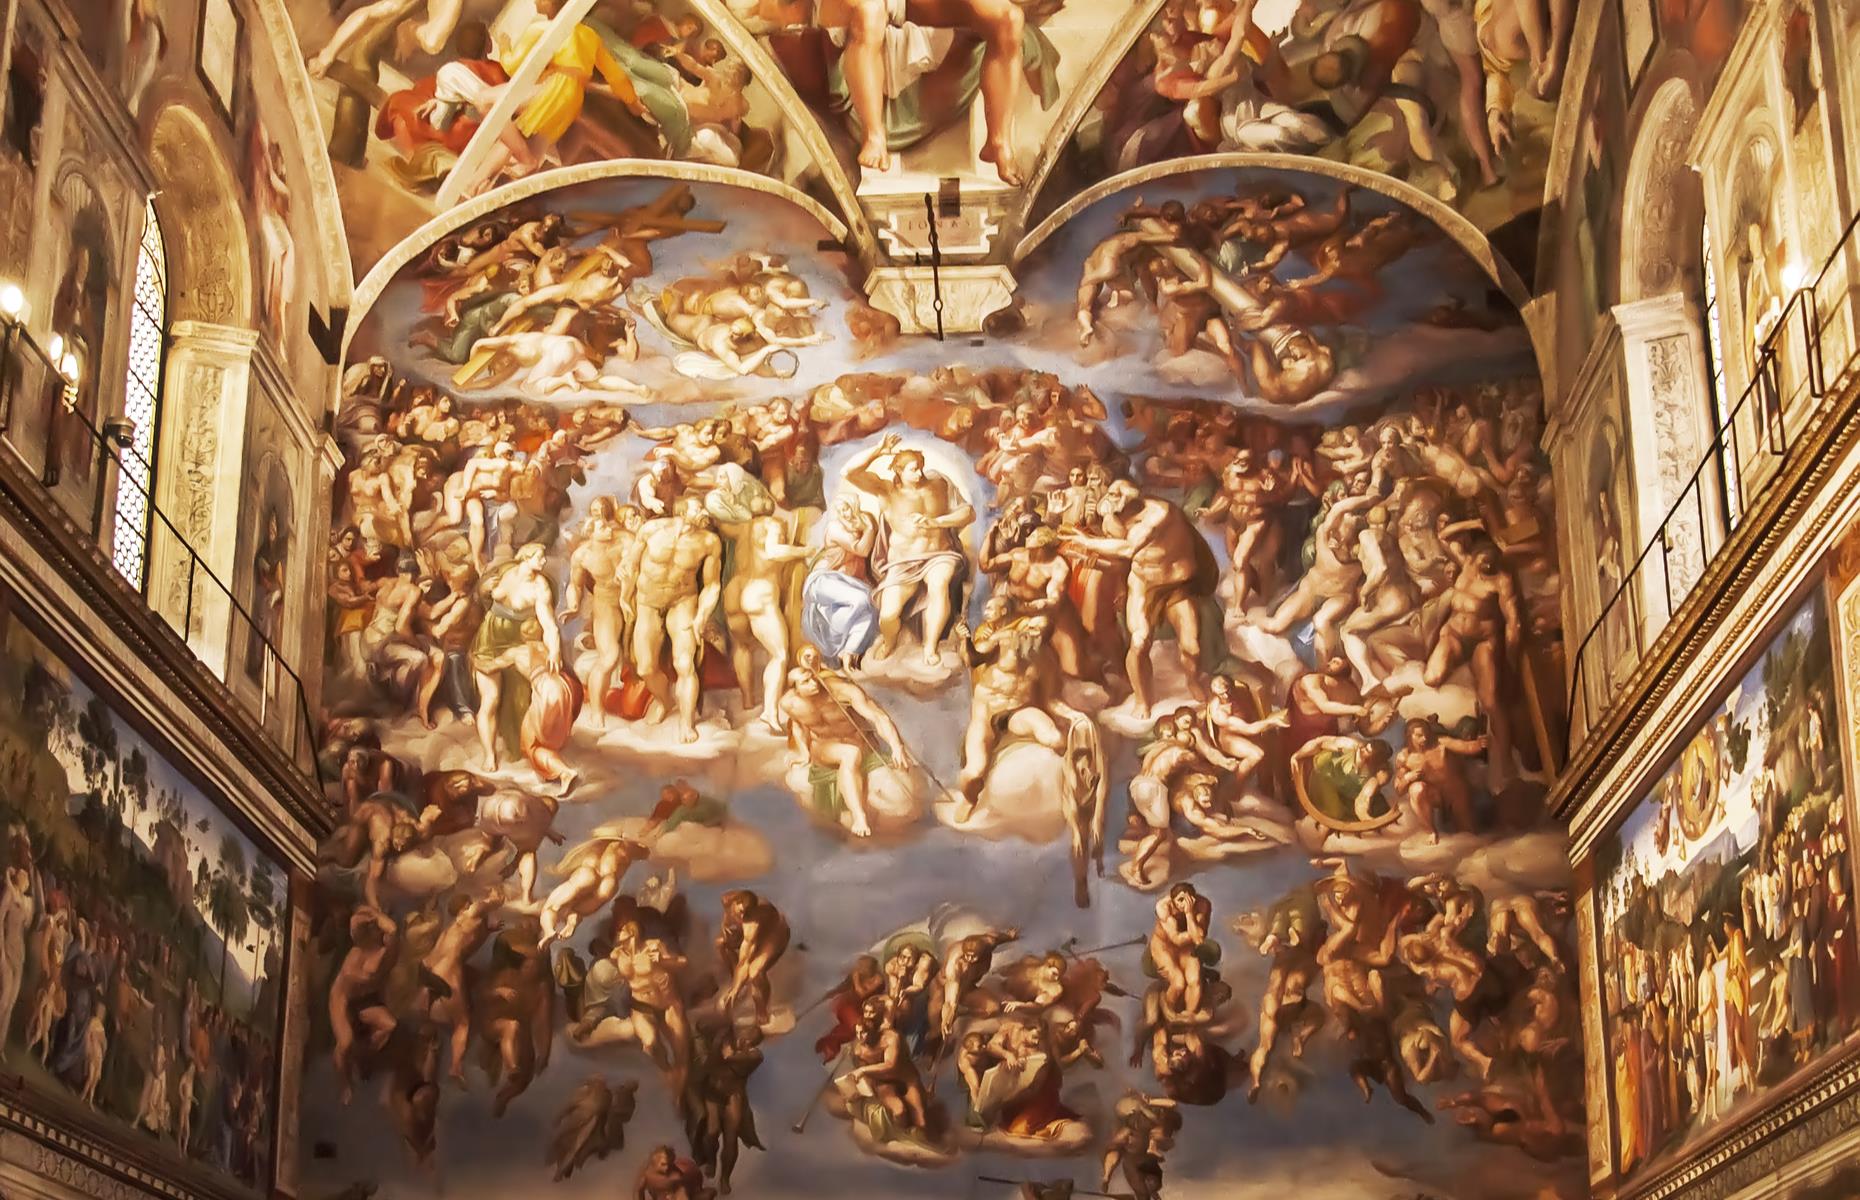 Michelangelo's renowned masterpiece – the ceiling of the Sistine Chapel – is undoubtedly breathtaking, but you might want to think twice before visiting. Sadly, the experience of viewing Vatican City's most magnificent artwork can be a bit of a letdown – social media is awash with people complaining it's "underwhelming" and "overrated".